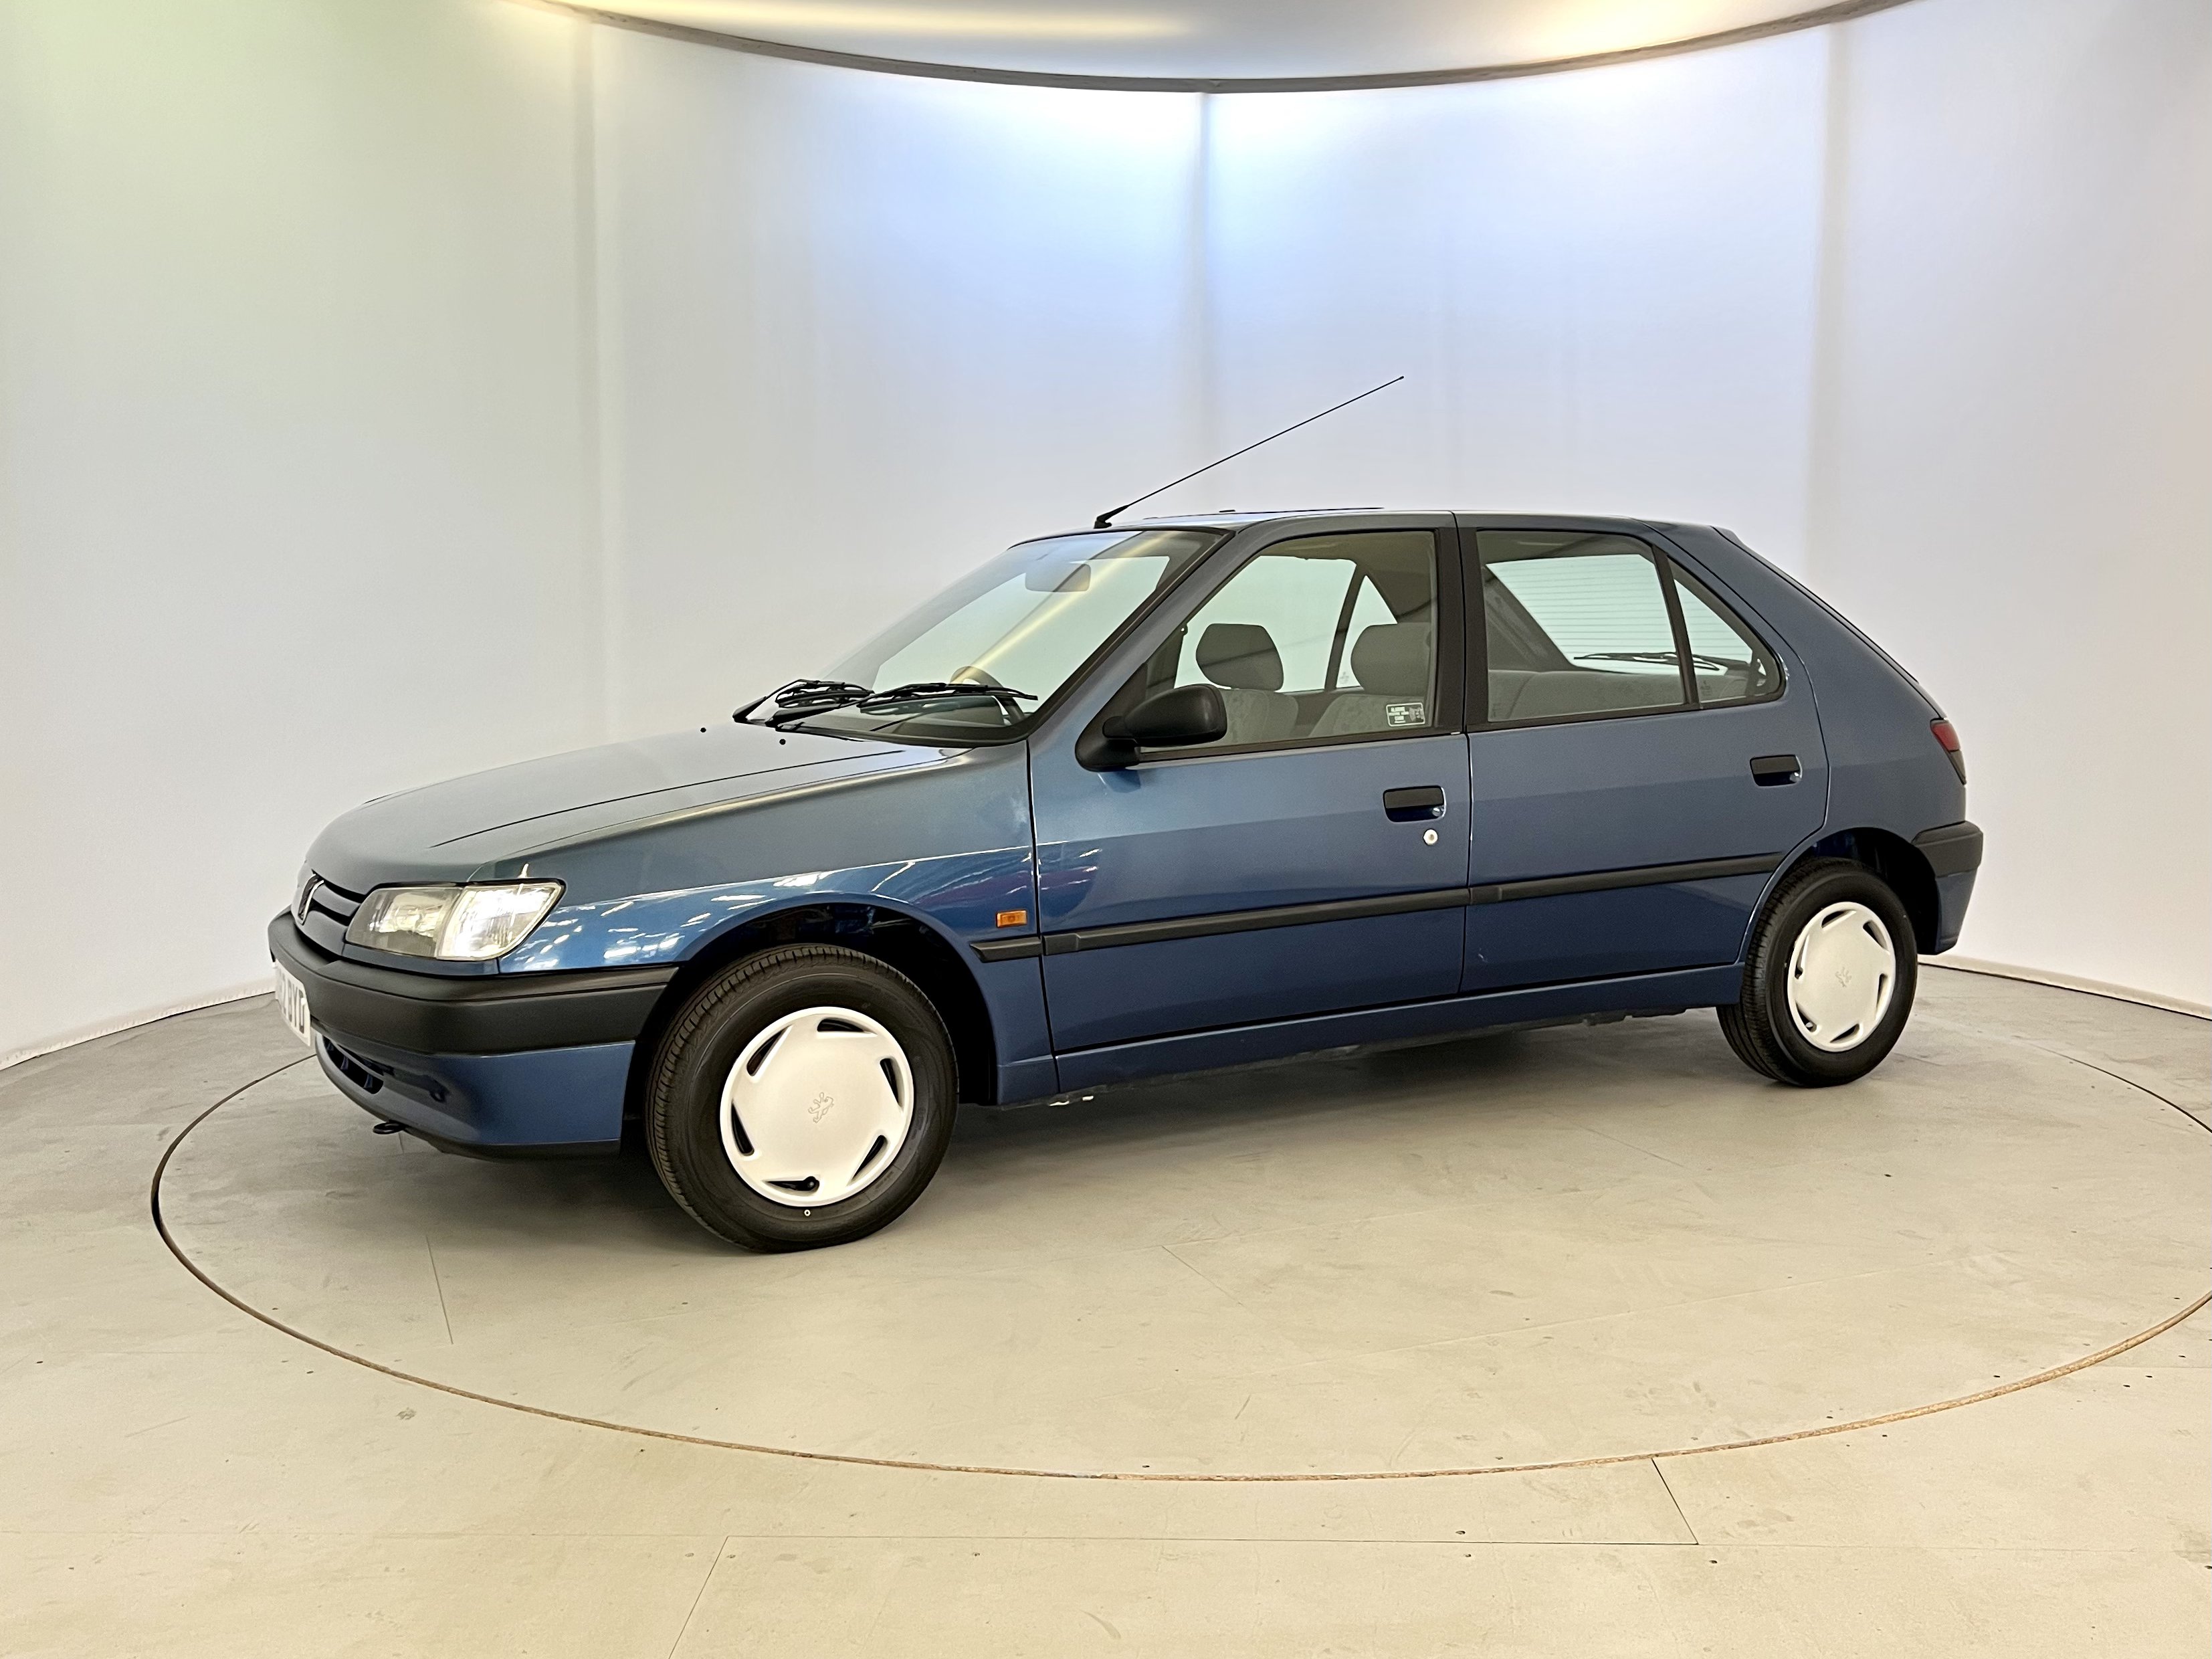 Peugeot 306 - Image 4 of 36